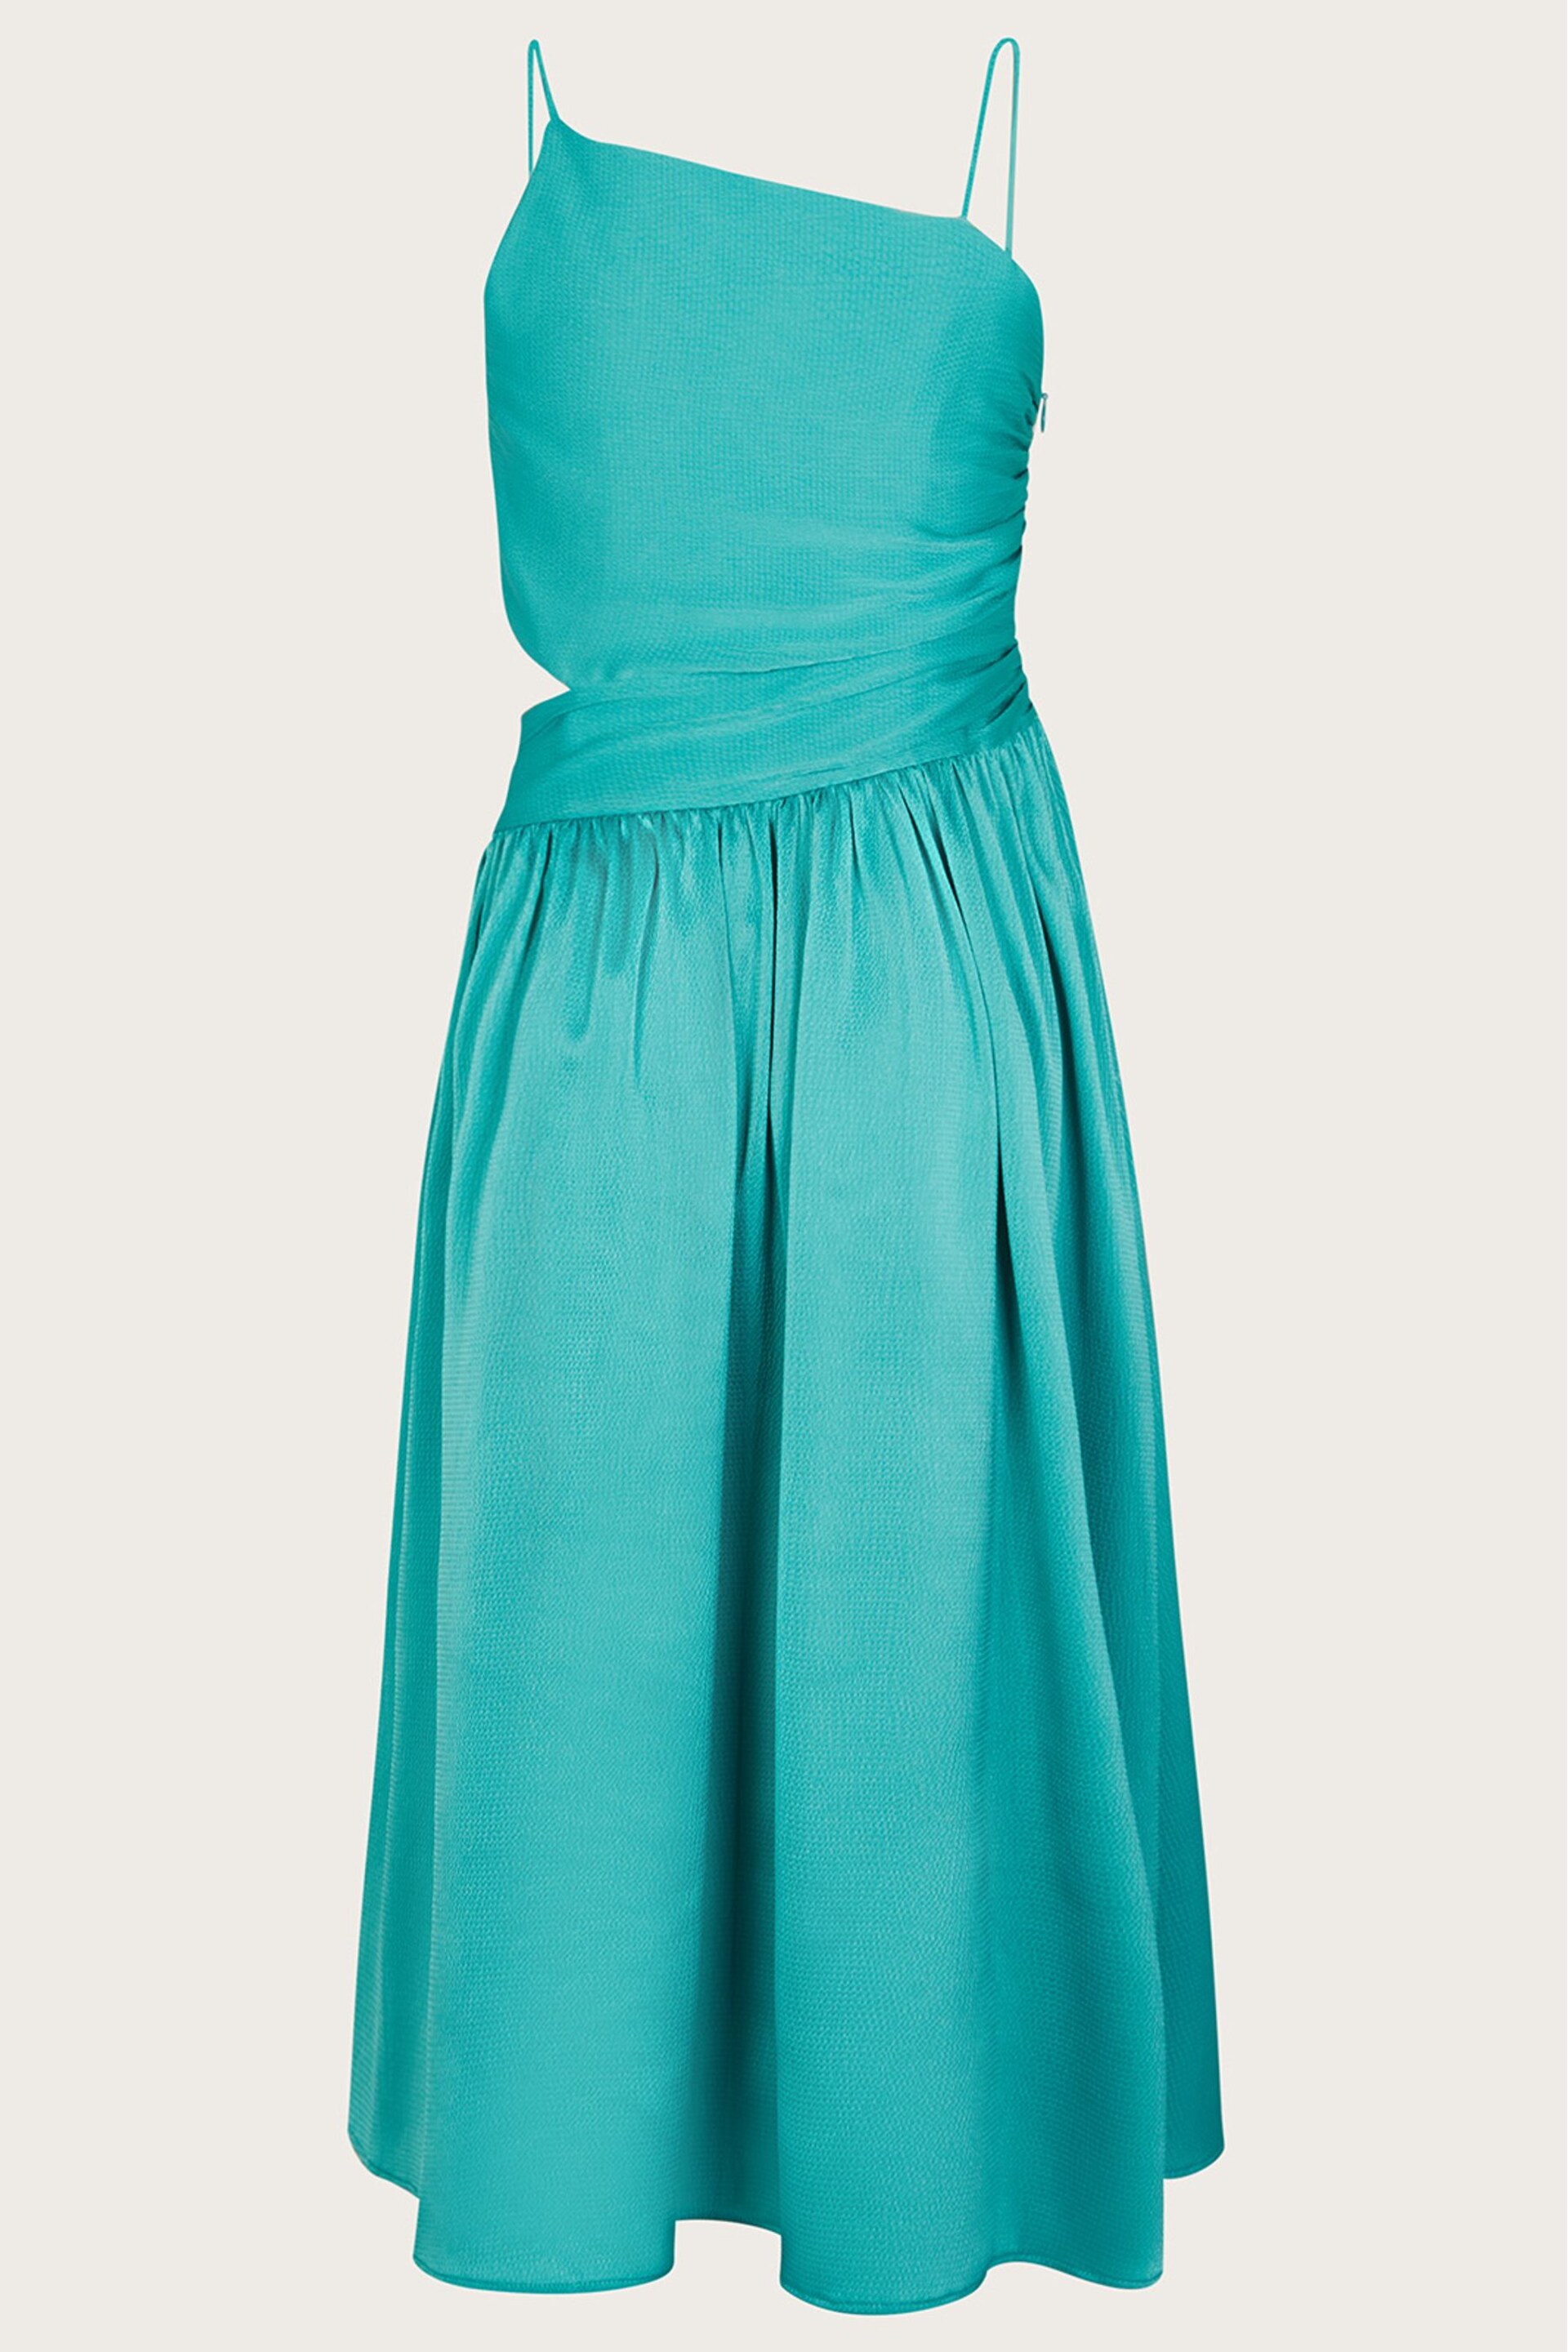 Monsoon Green Satin Cut-Out Prom Dress - Image 2 of 3